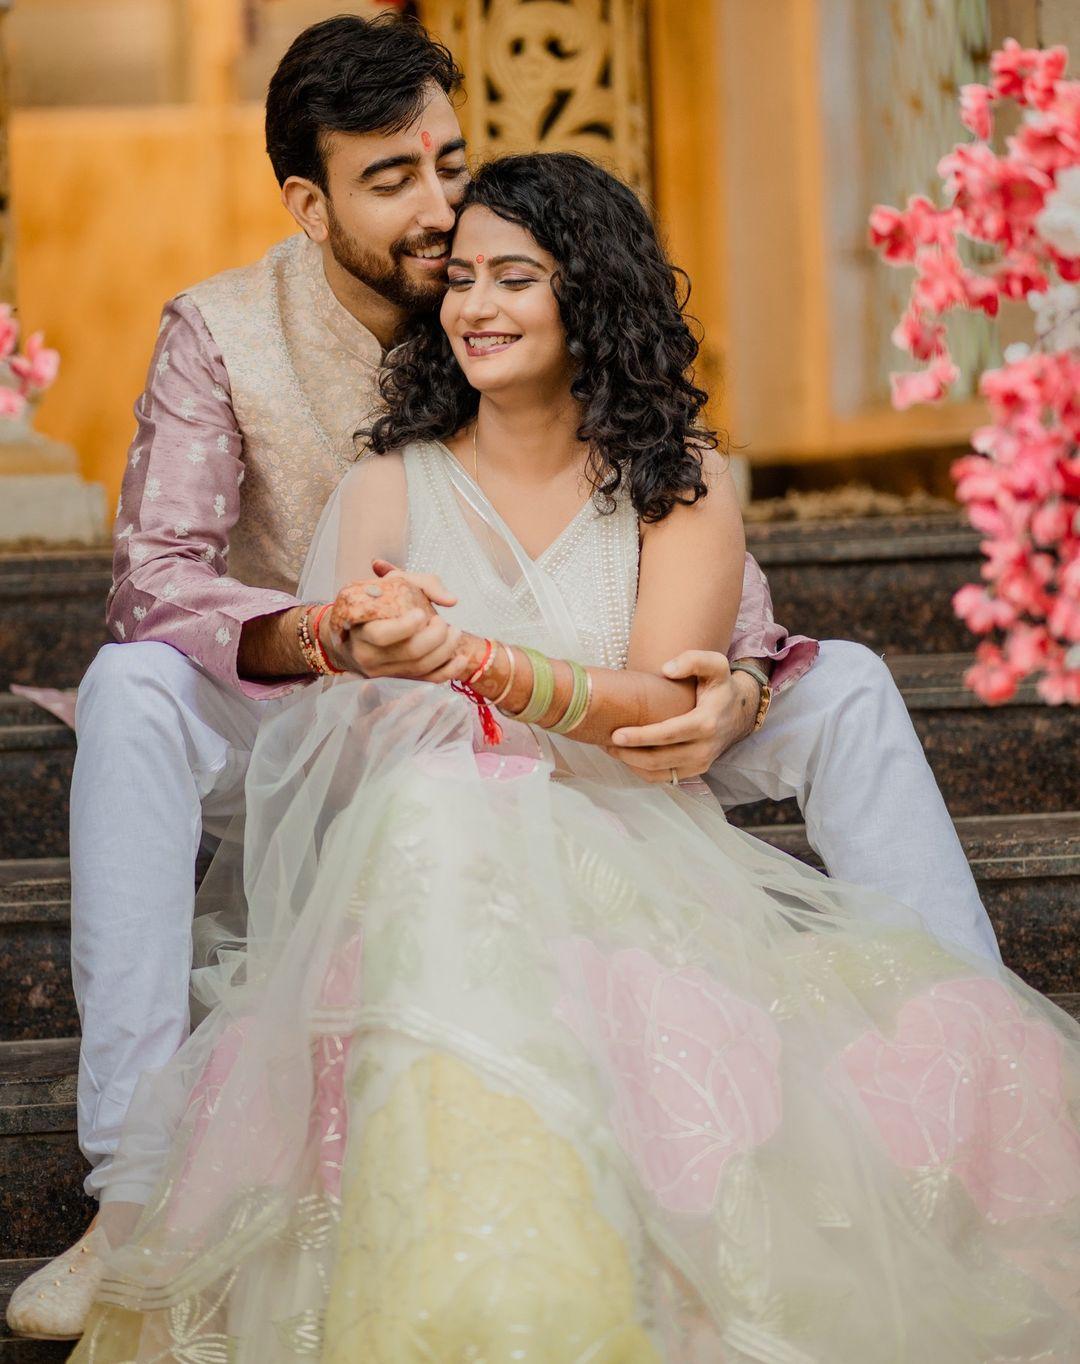 Engagement Photos | Submitted by Bride- Gagan Meelu | Please email us  hello@… | Indian wedding photography, Indian wedding photography couples,  Wedding photos poses